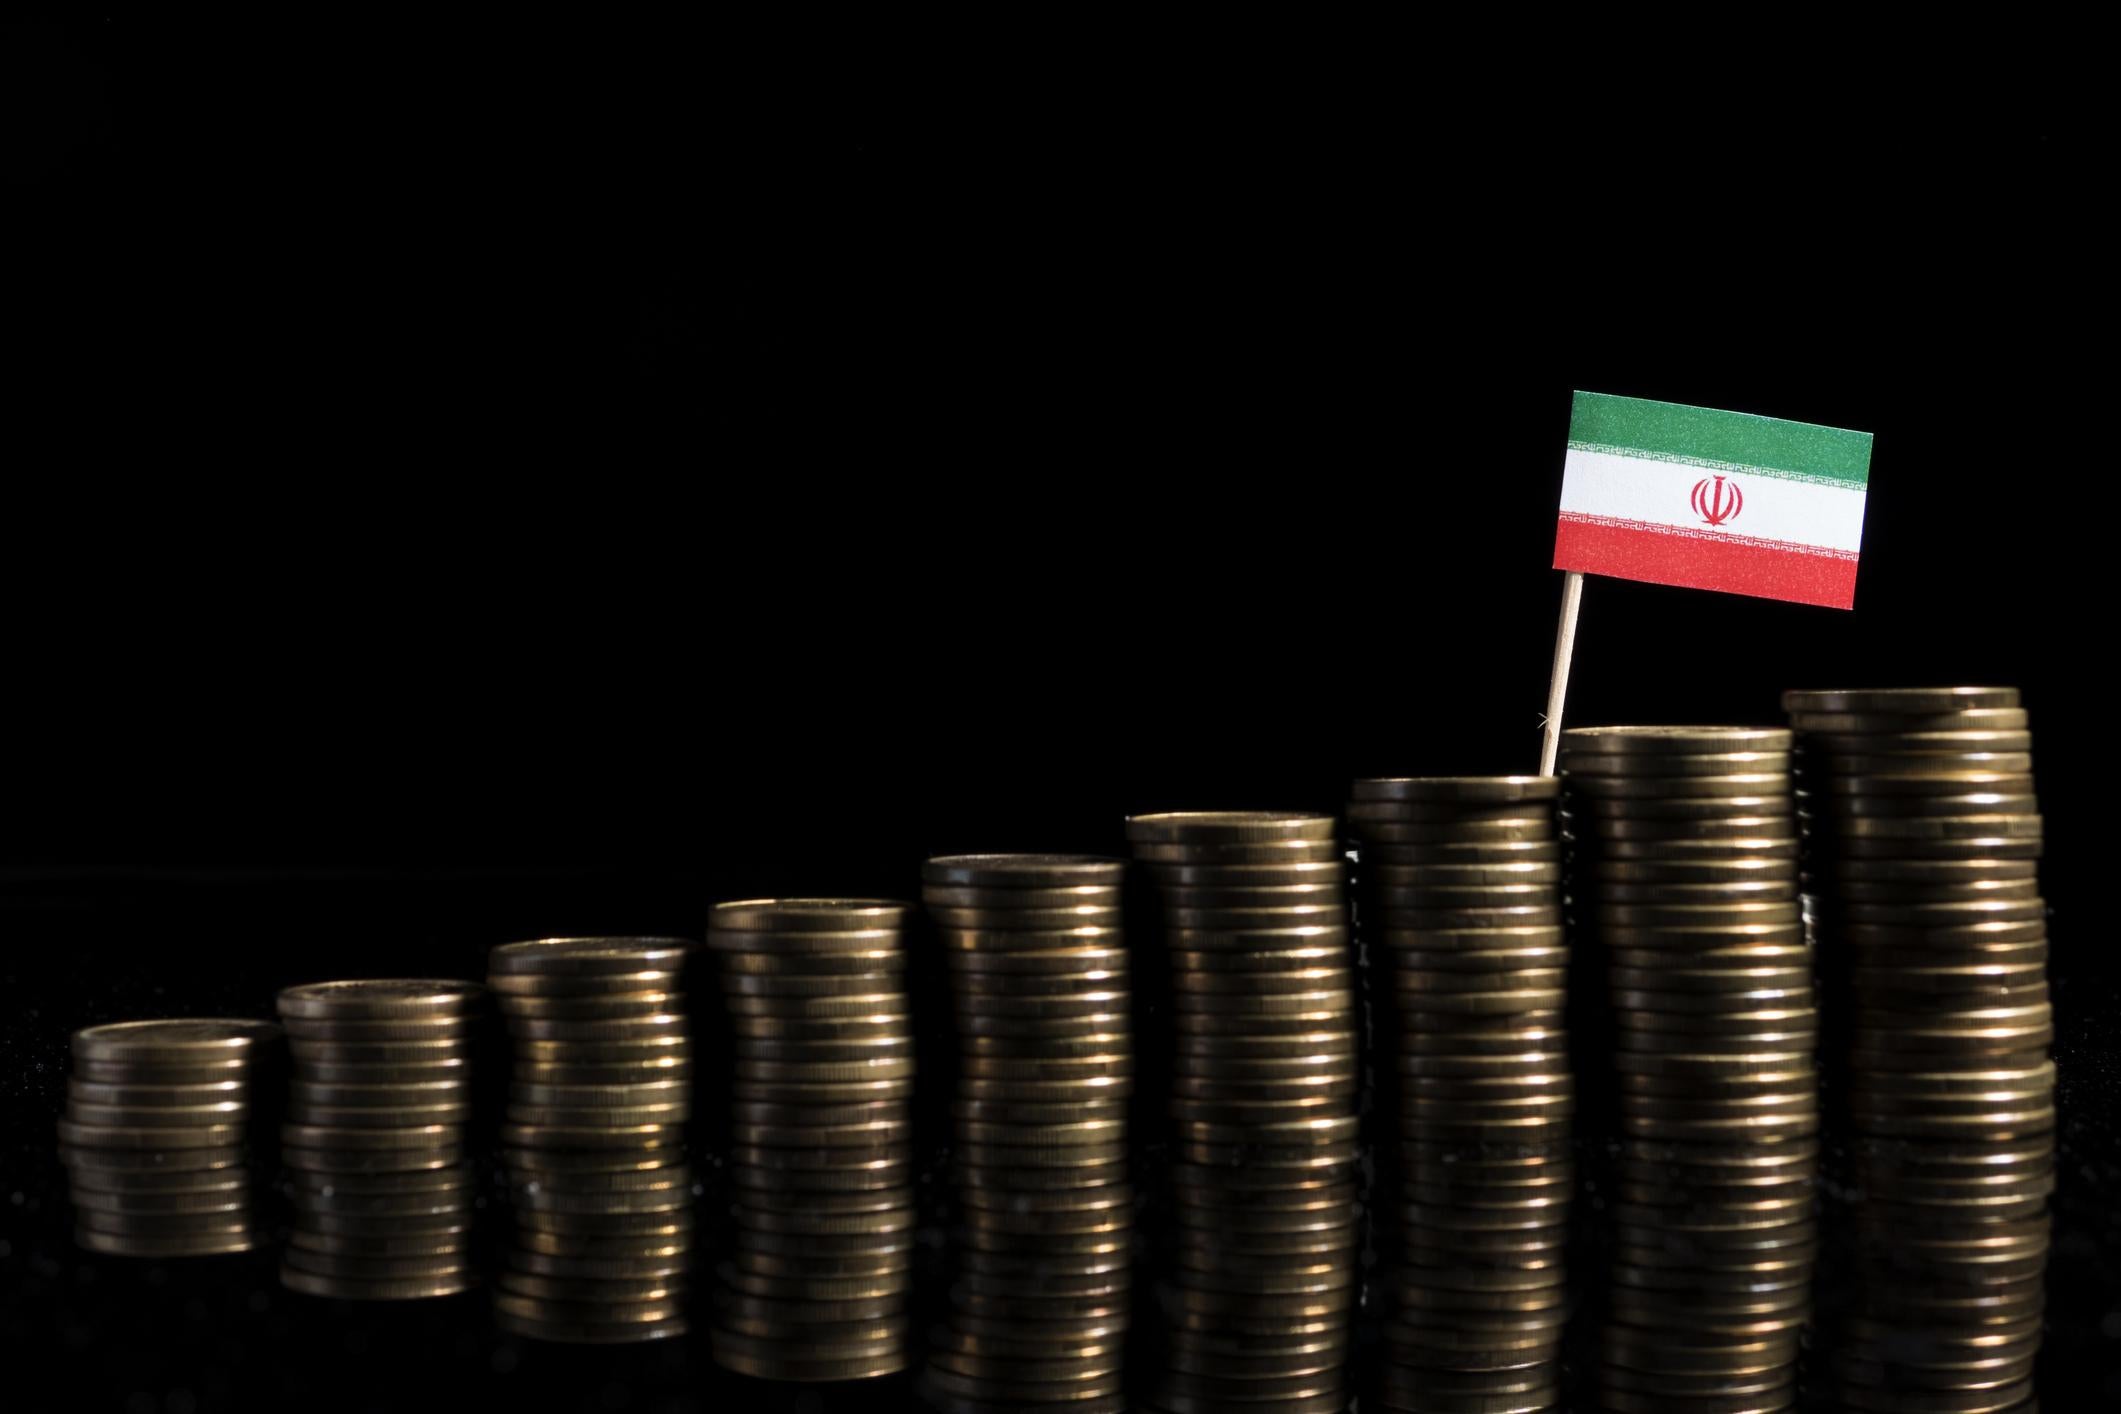 Iran's move to introduce a national cryptocurrency follows a similar effort by Venezuela with its petro virtual currency